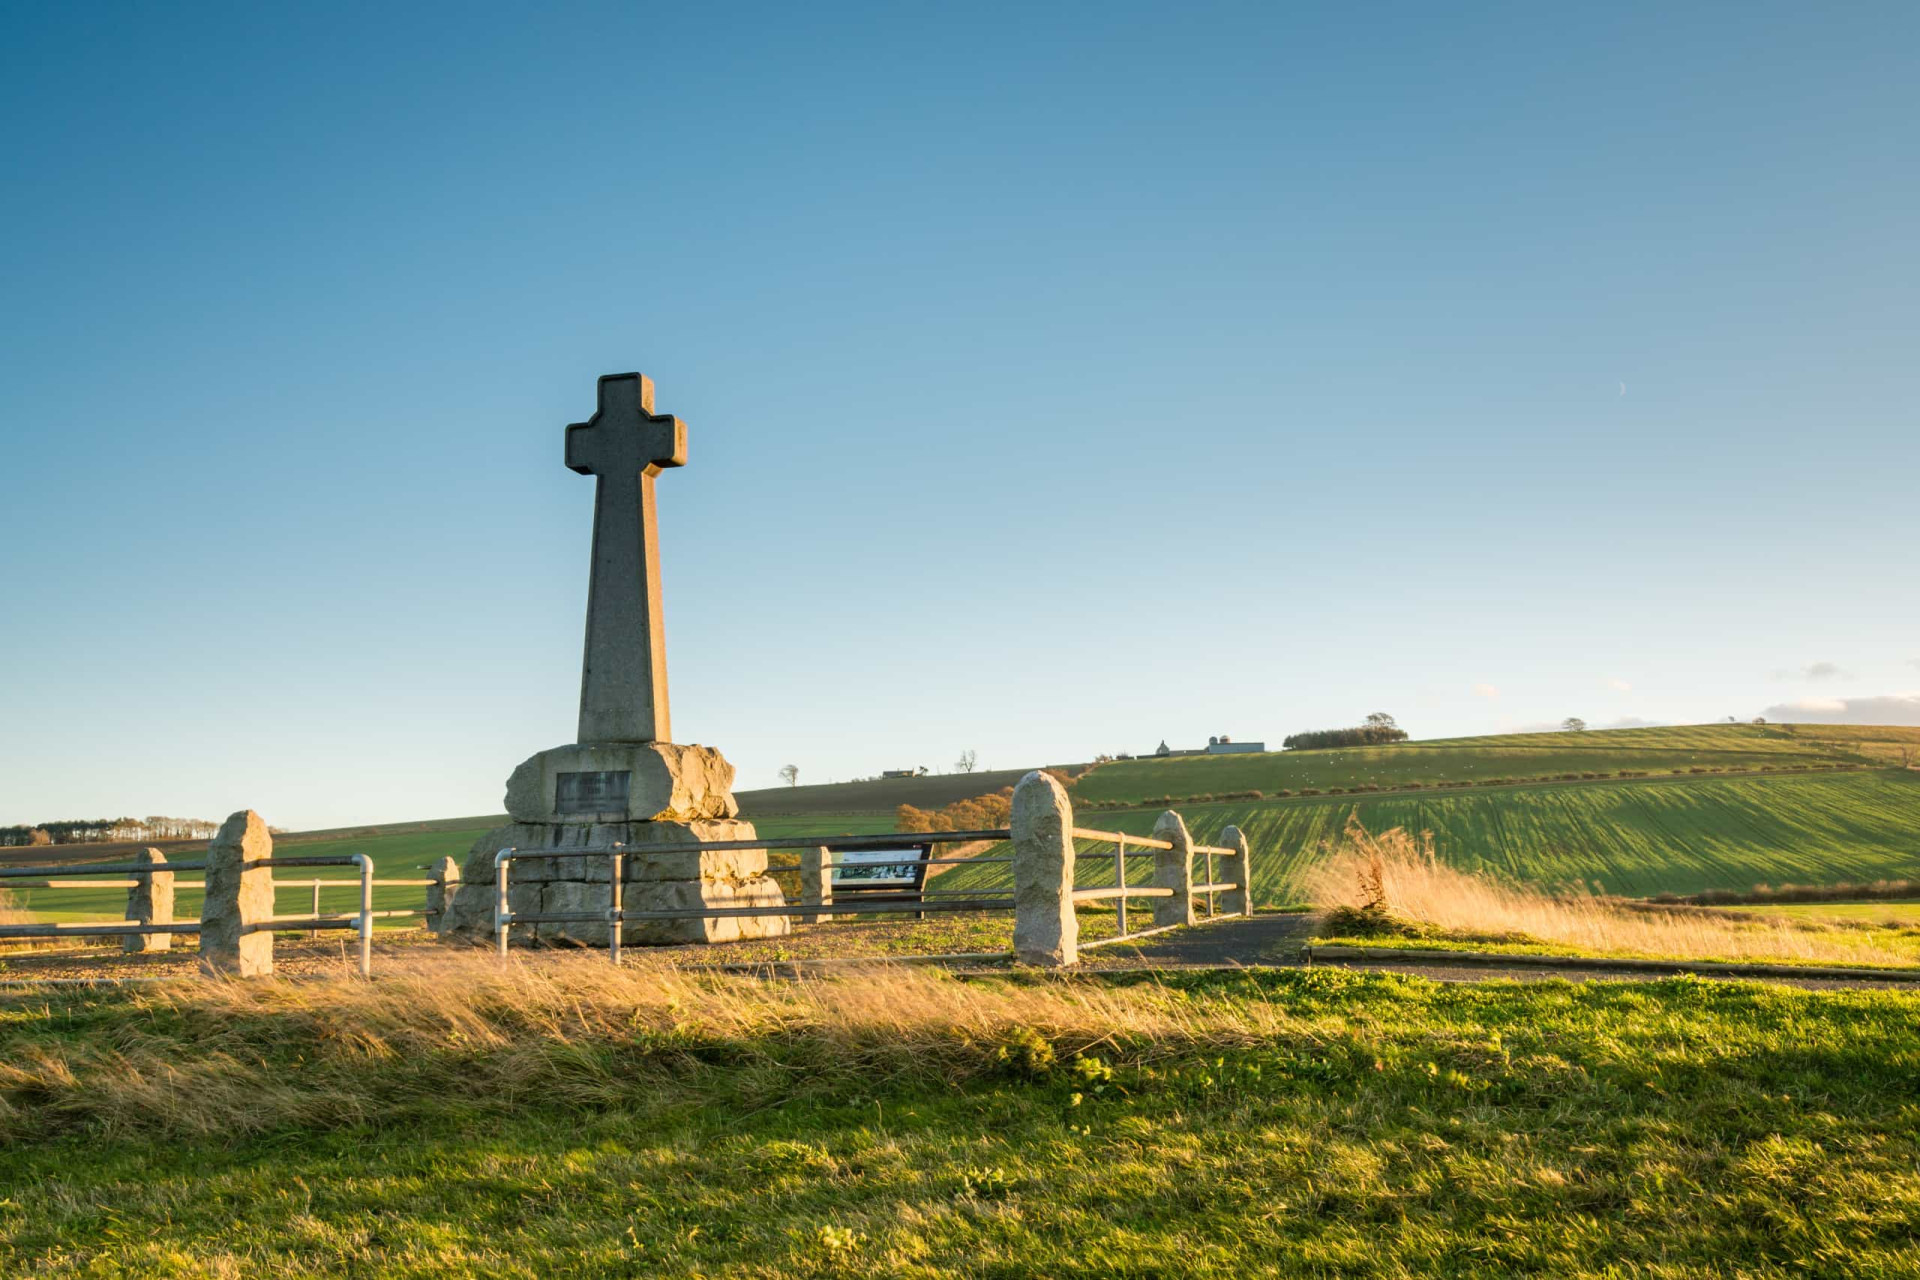 <p>A large stone cross landmarks the pocket of moorland near Branxton in  Northumberland, northern England, where the Battle of Flodden took place on September 9, 1513. Essentially a clash between the Kingdom of England and the Kingdom of Scotland, Flodden was the largest battle fought between the two warring realms. It resulted in an English victory.</p><p>You may also like:<a href="https://www.starsinsider.com/n/396394?utm_source=msn.com&utm_medium=display&utm_campaign=referral_description&utm_content=627984en-za"> Infamous celebrity mug shots</a></p>